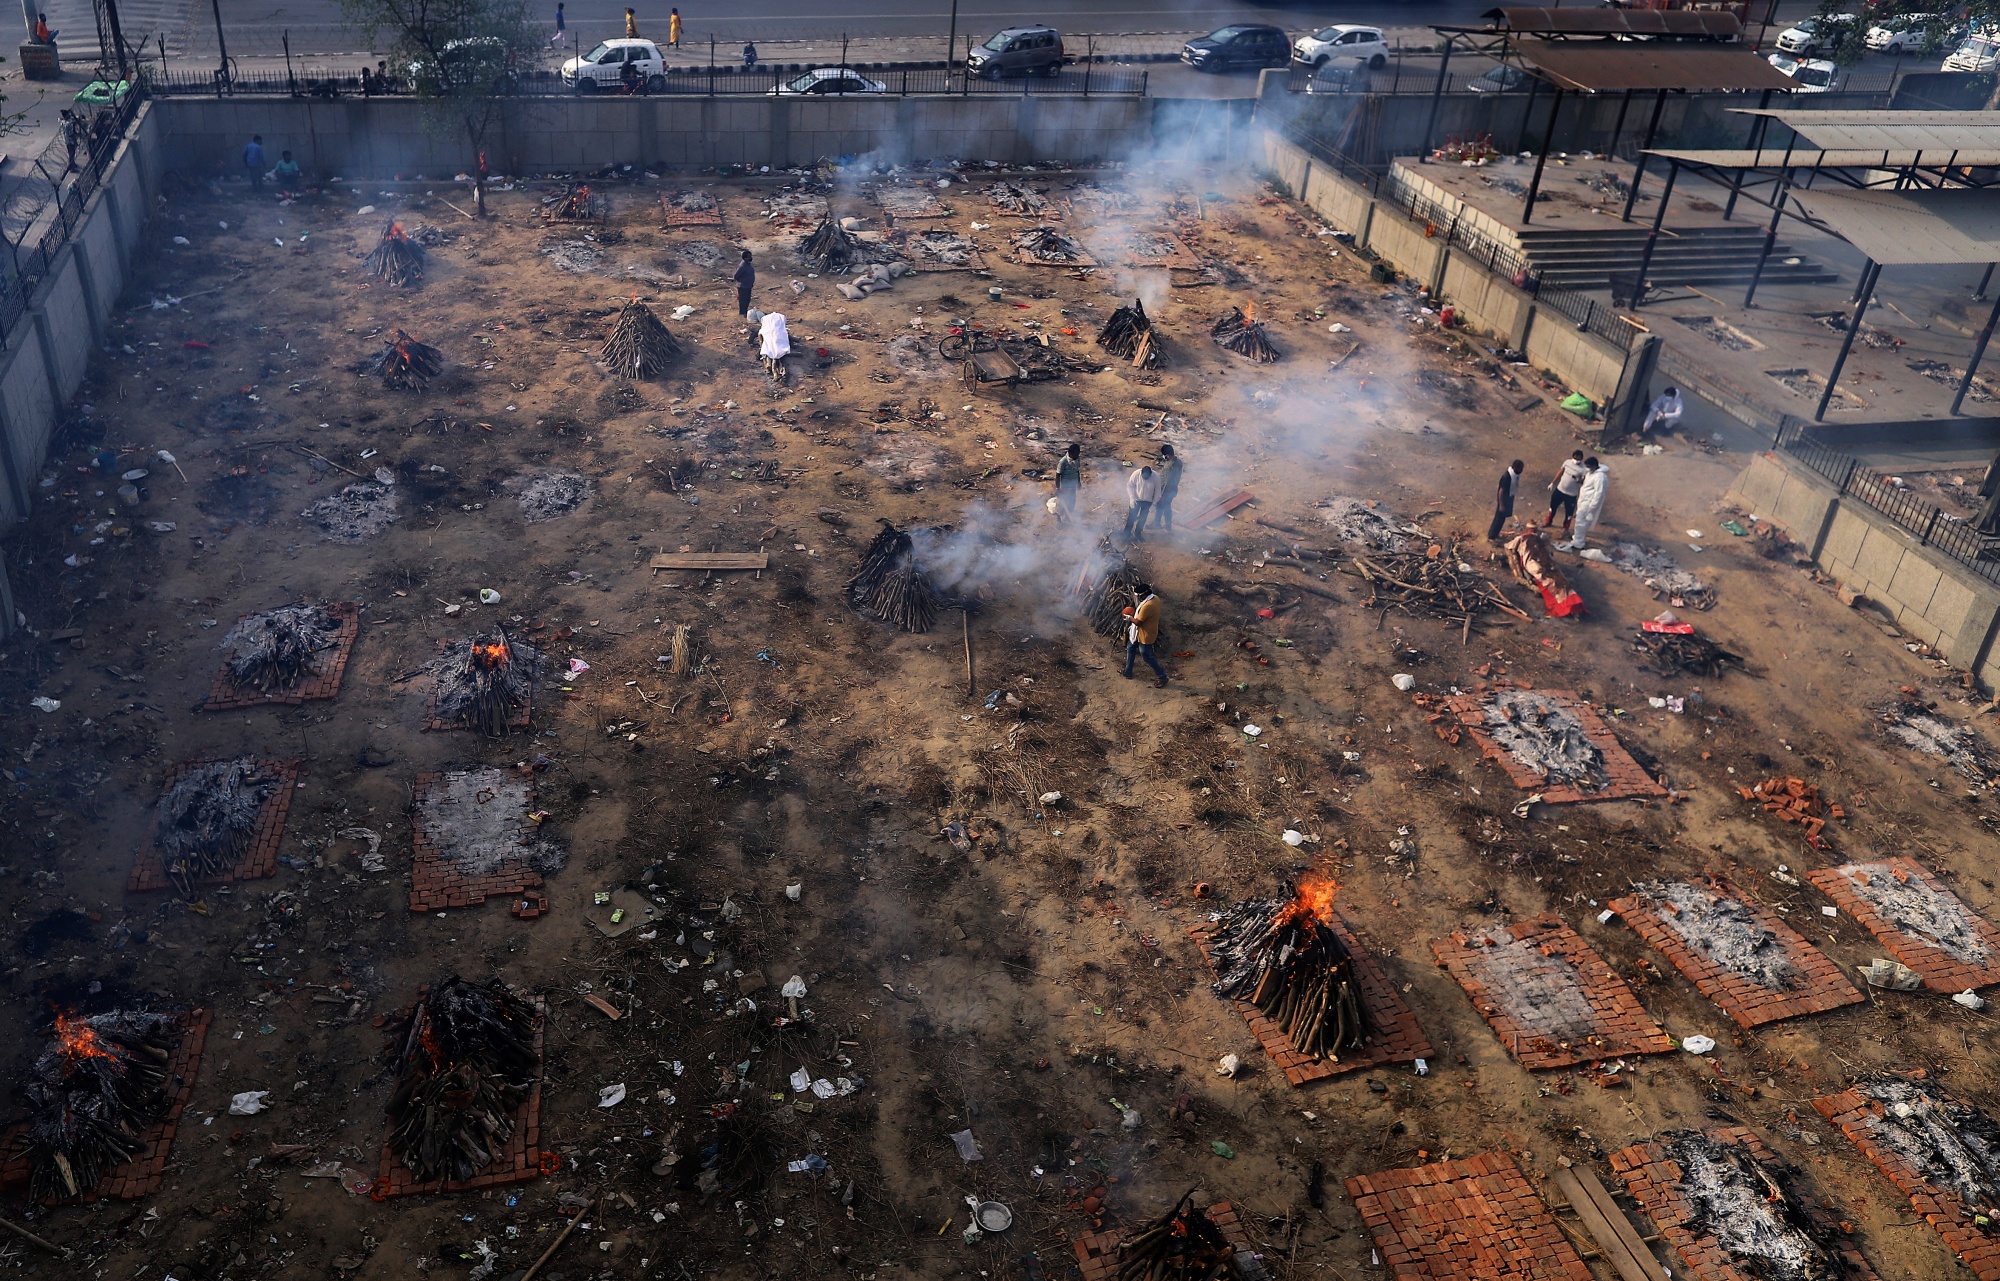 Funeral pyres burn at a sit of mass cremations in New Delhi, India, on April 21.